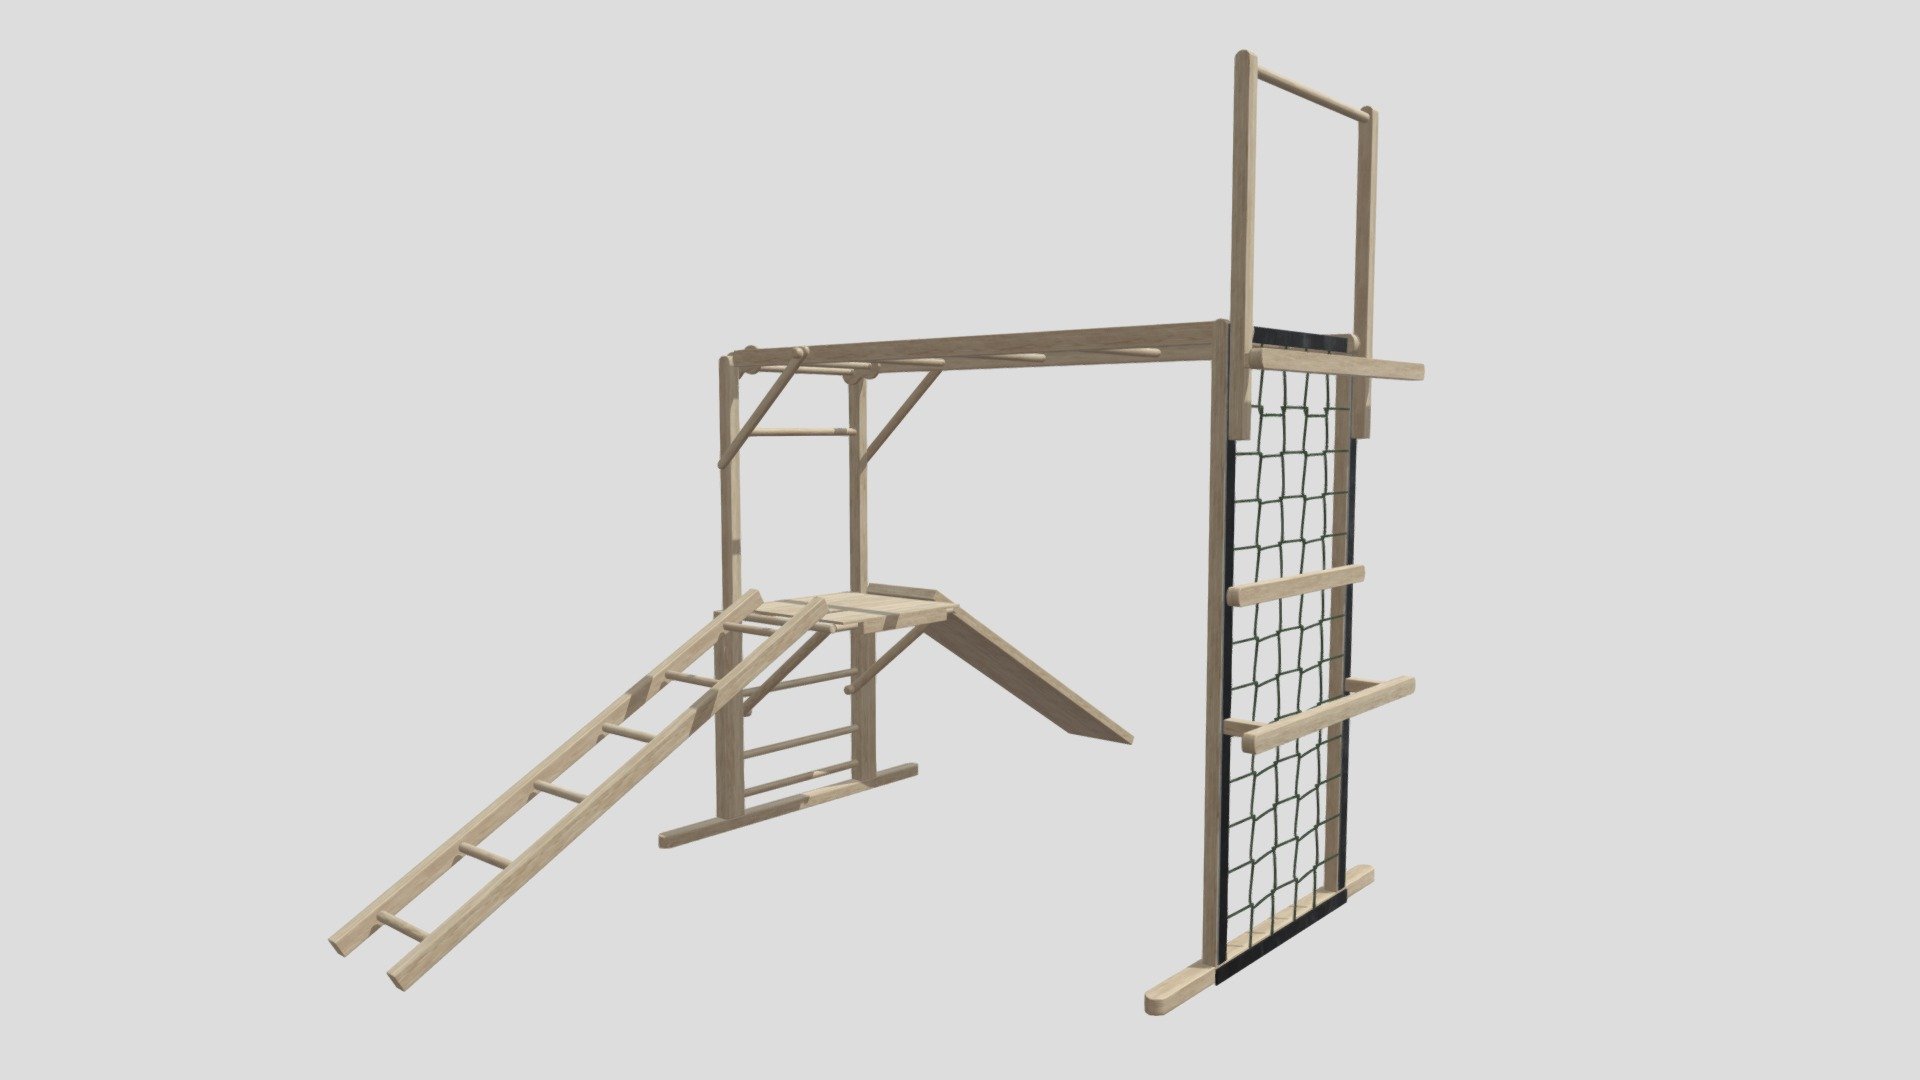 Highly detailed 3d model of playground equipment with all textures, shaders and materials. It is ready to use, just put it into your scene 3d model